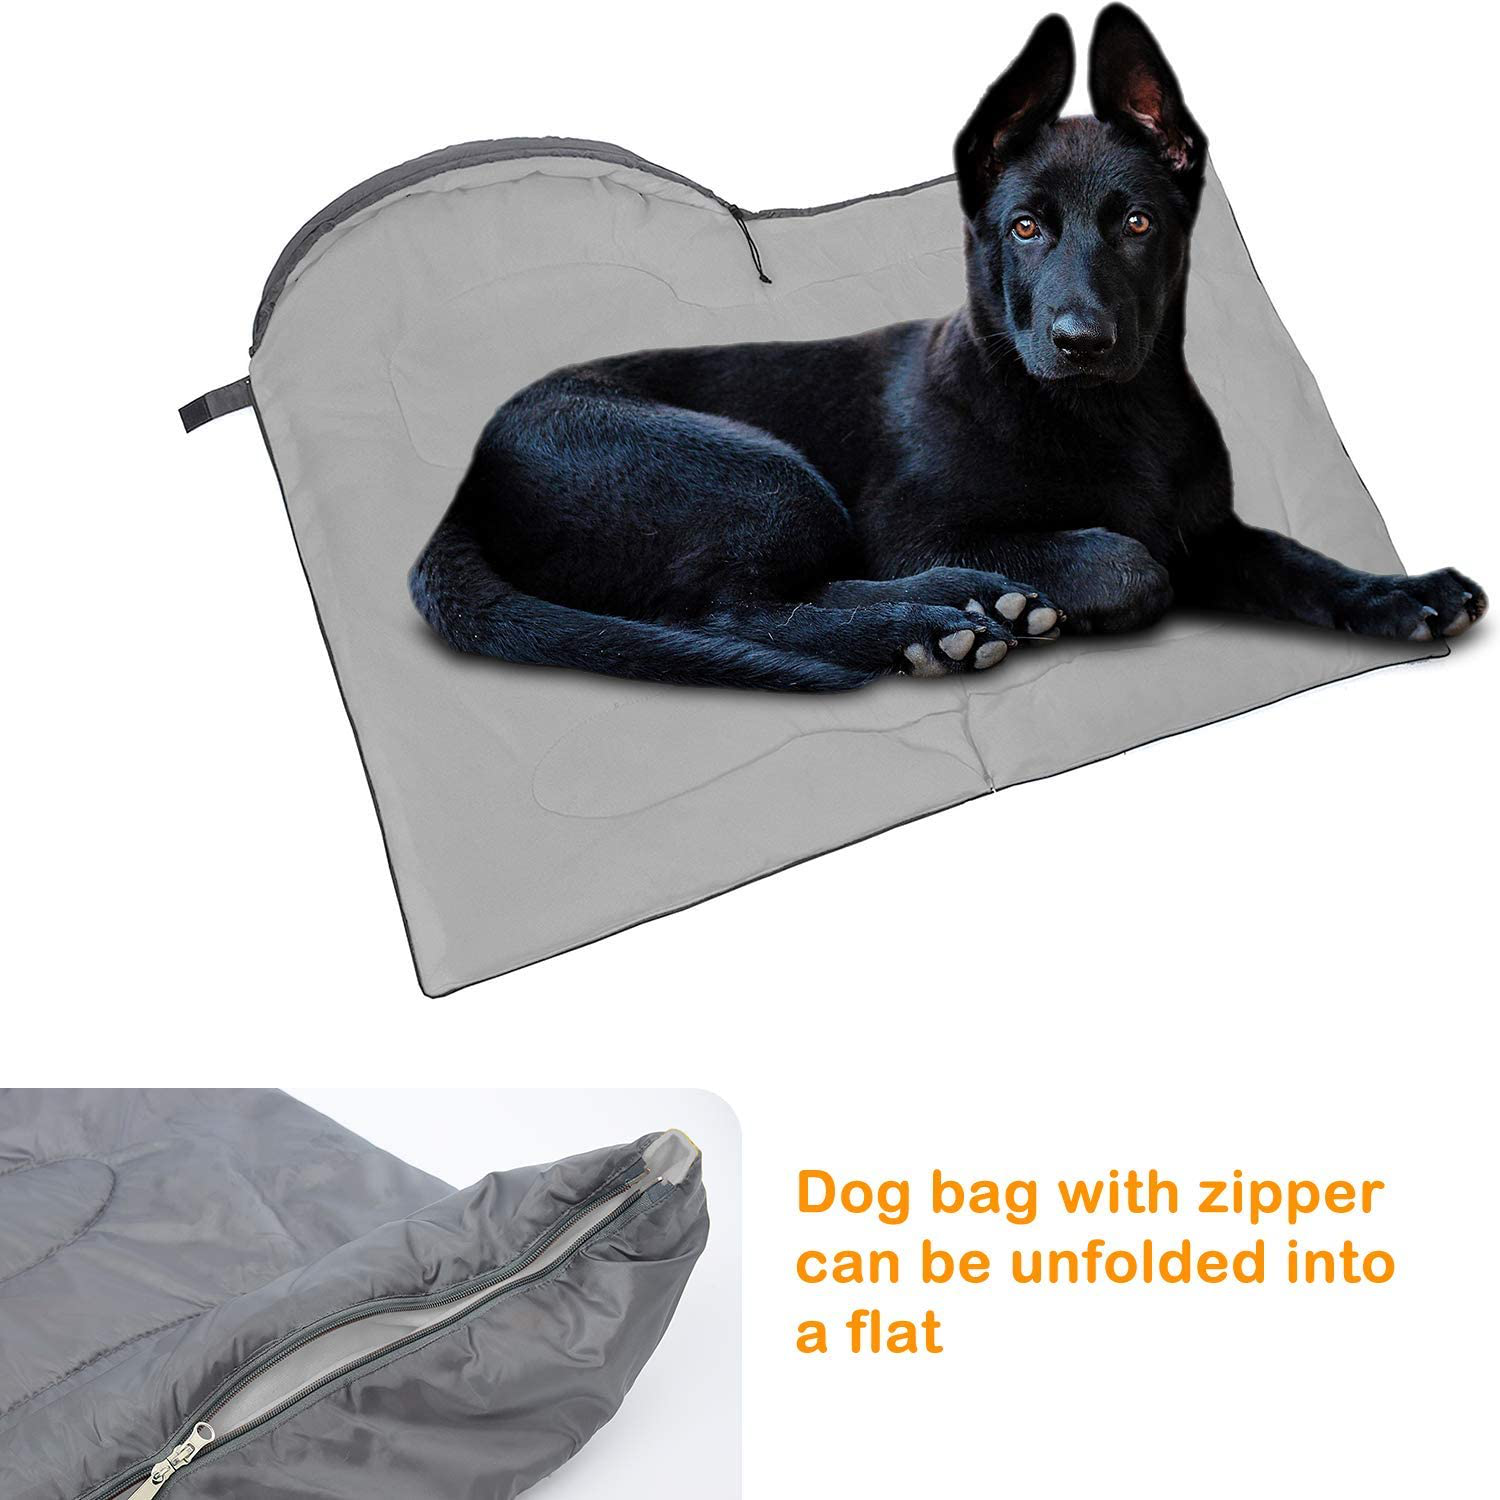 KUDES Dog Sleeping Bag Waterproof Warm Packable Dog Bed with Storage Bag for Indoor Outdoor Travel Camping Hiking Backpacking (43''Lx27''W)